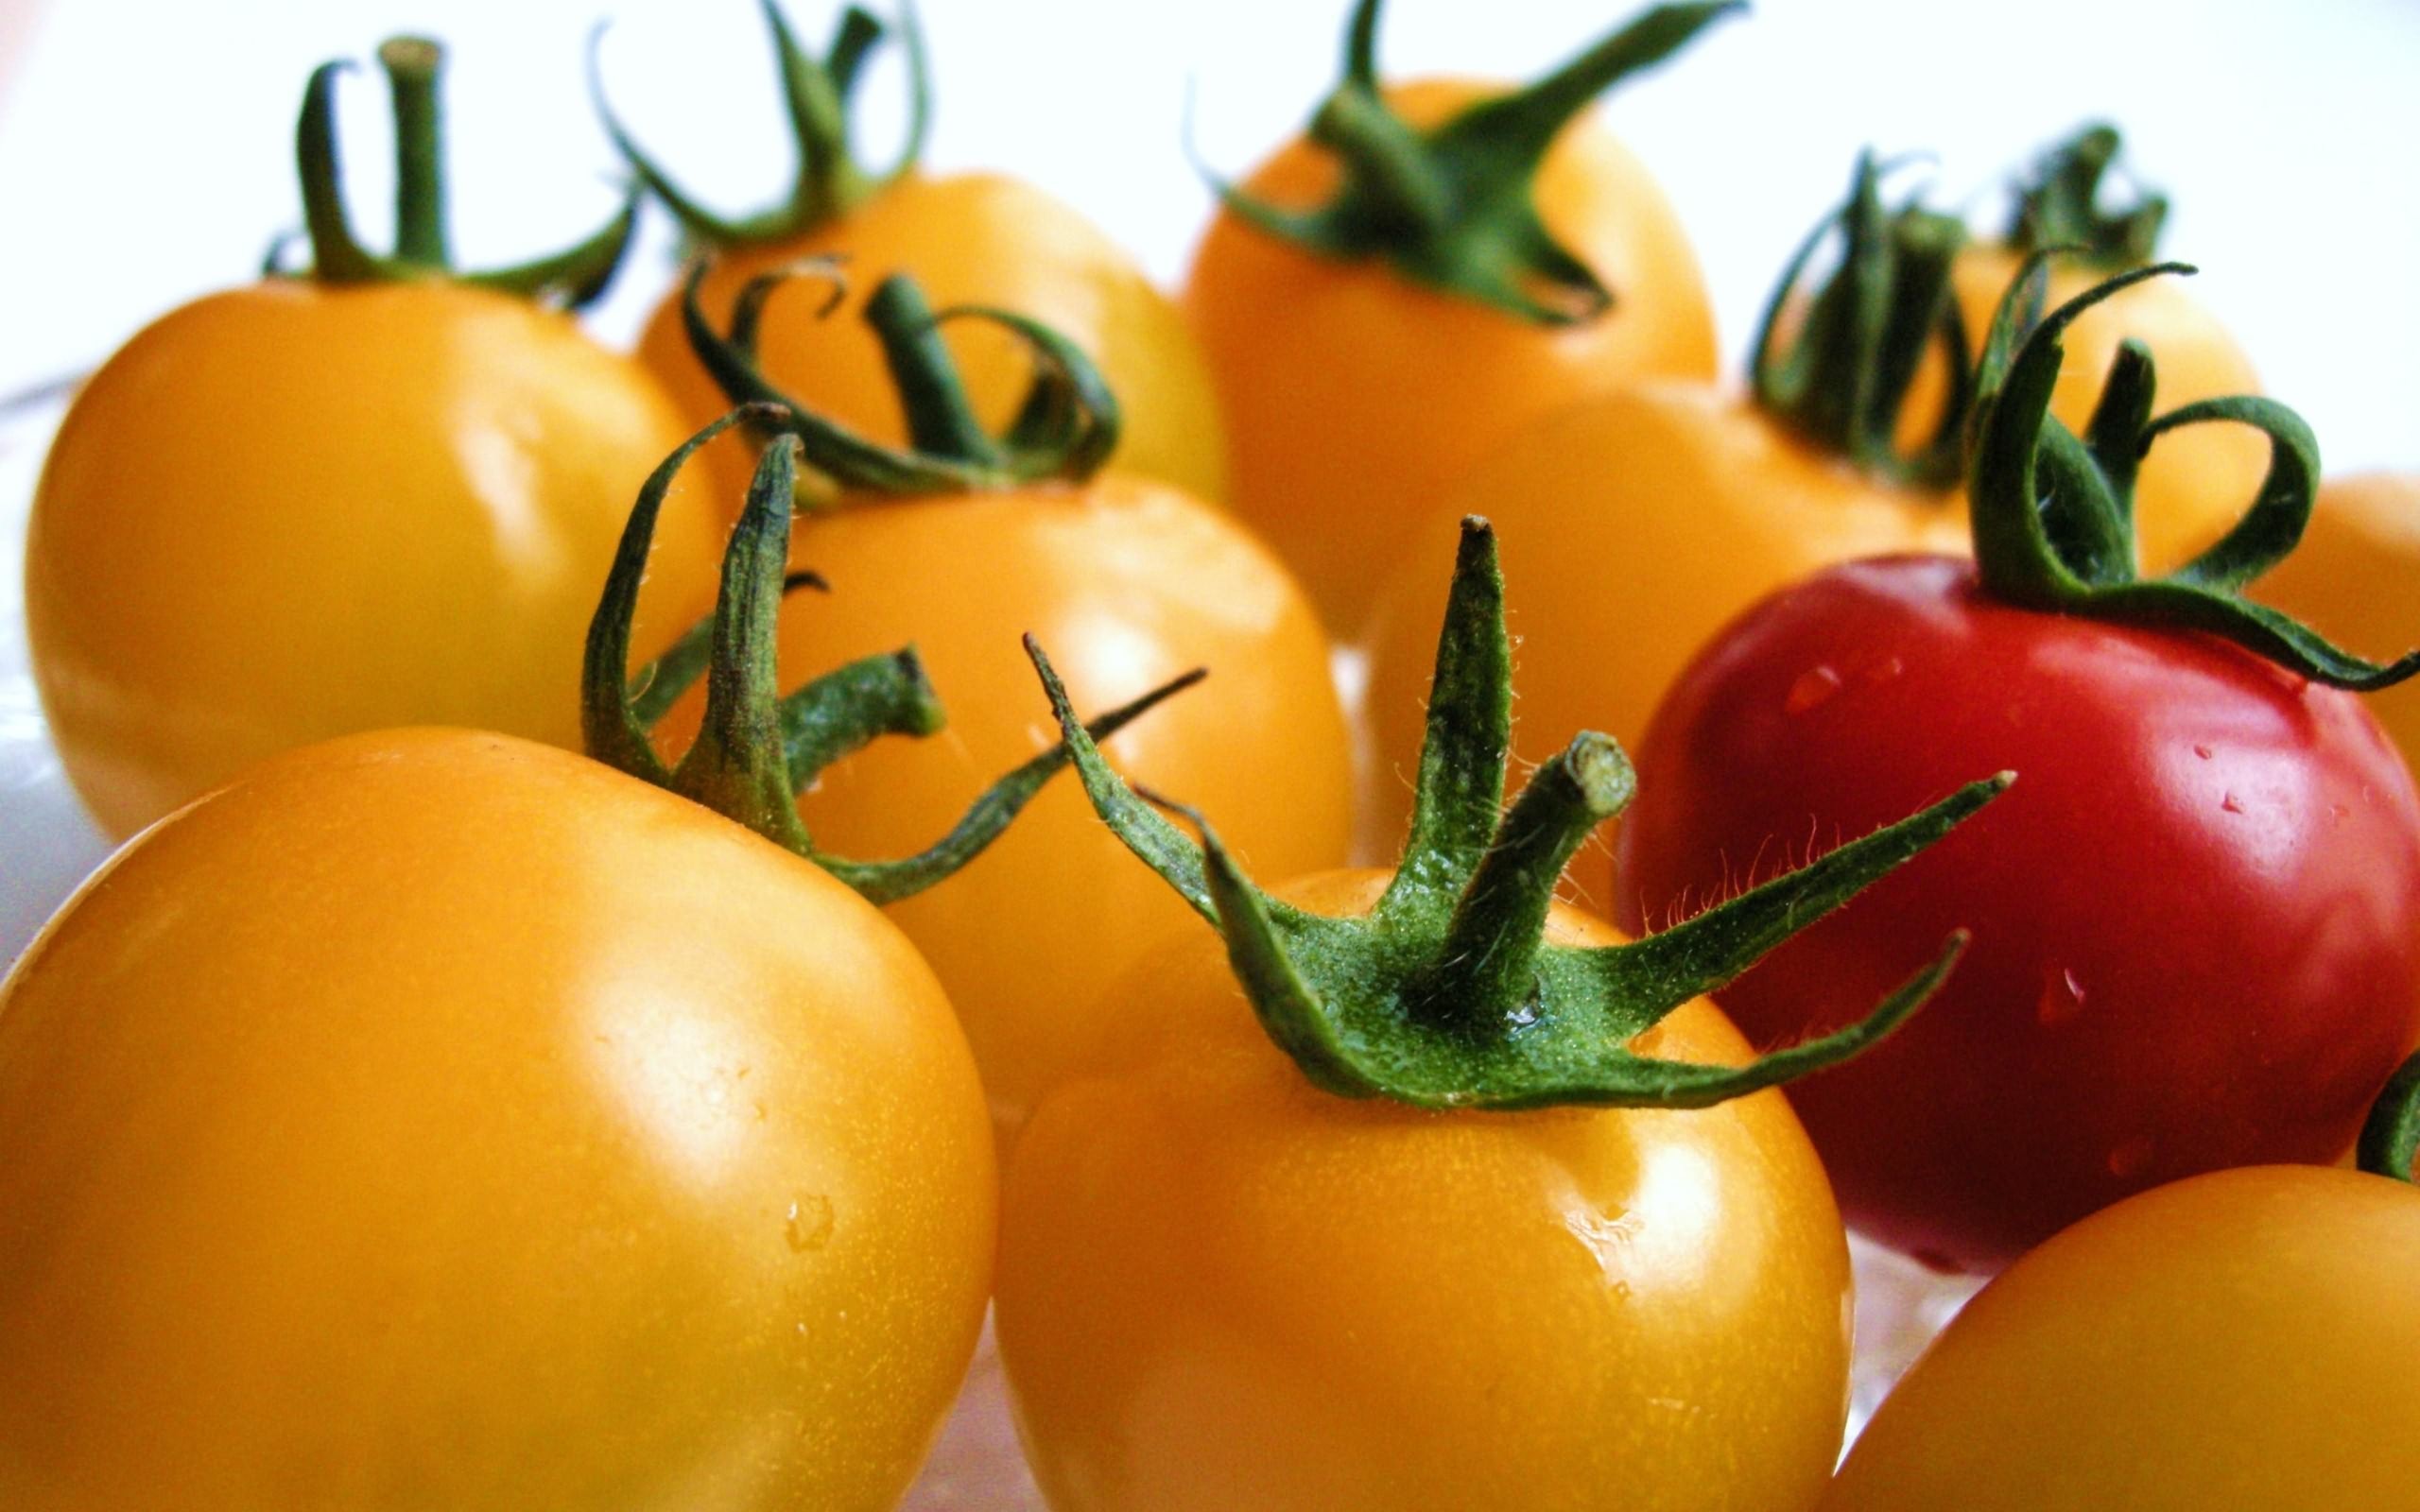 Wallpapers tomatoes cherry yellow on the desktop